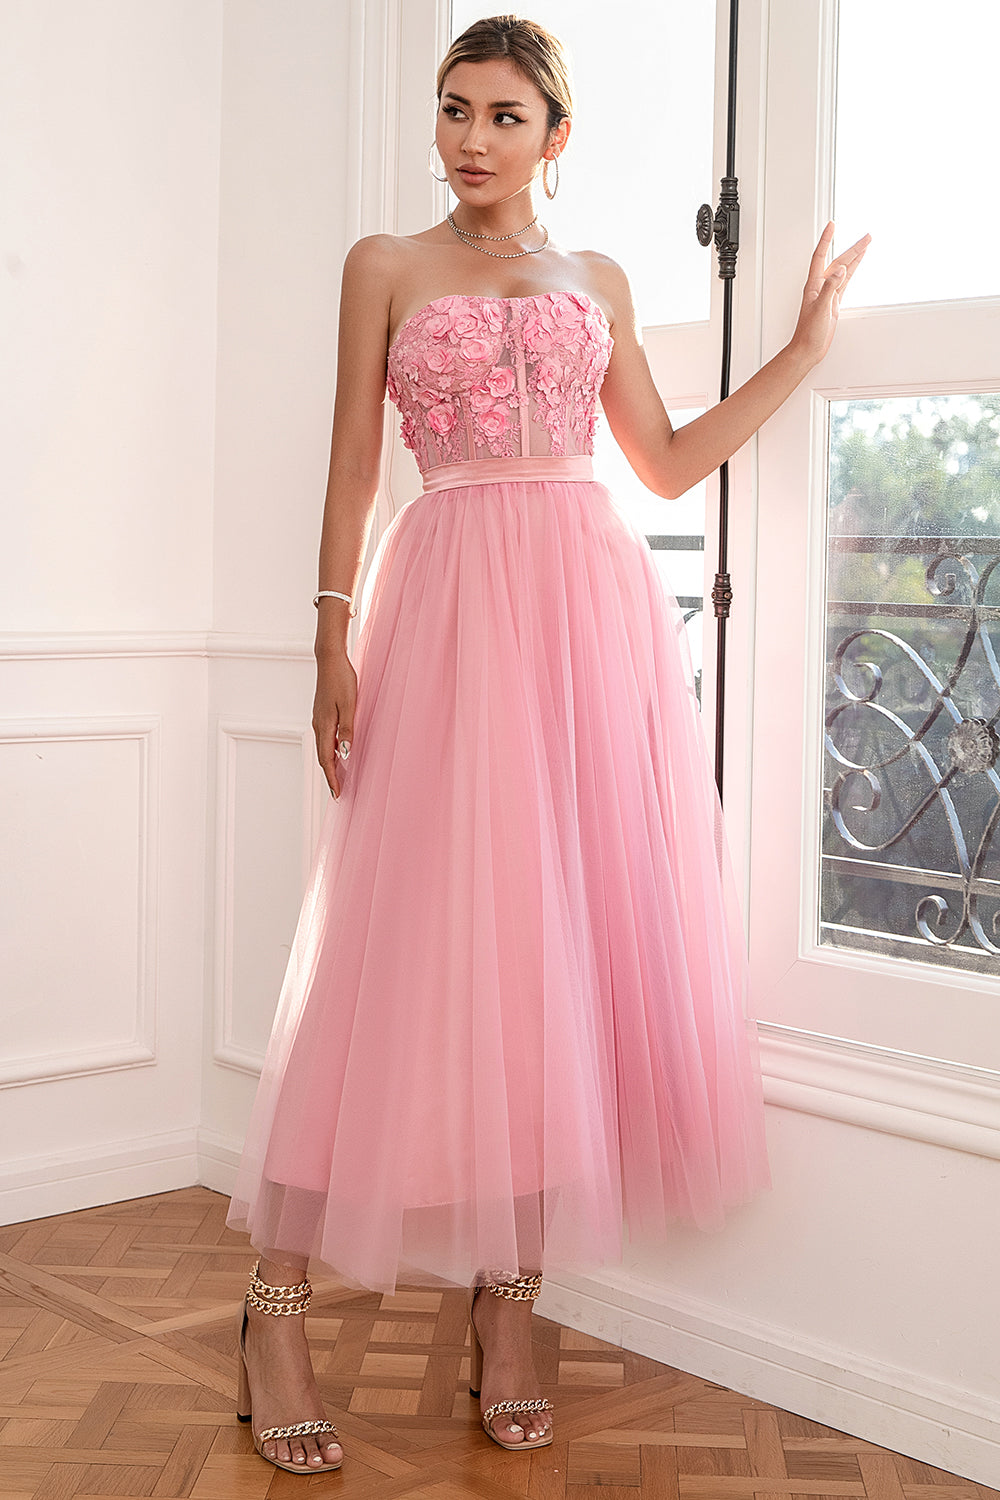 Gorgeous A Line Strapless Pink Prom Dress with Appliques